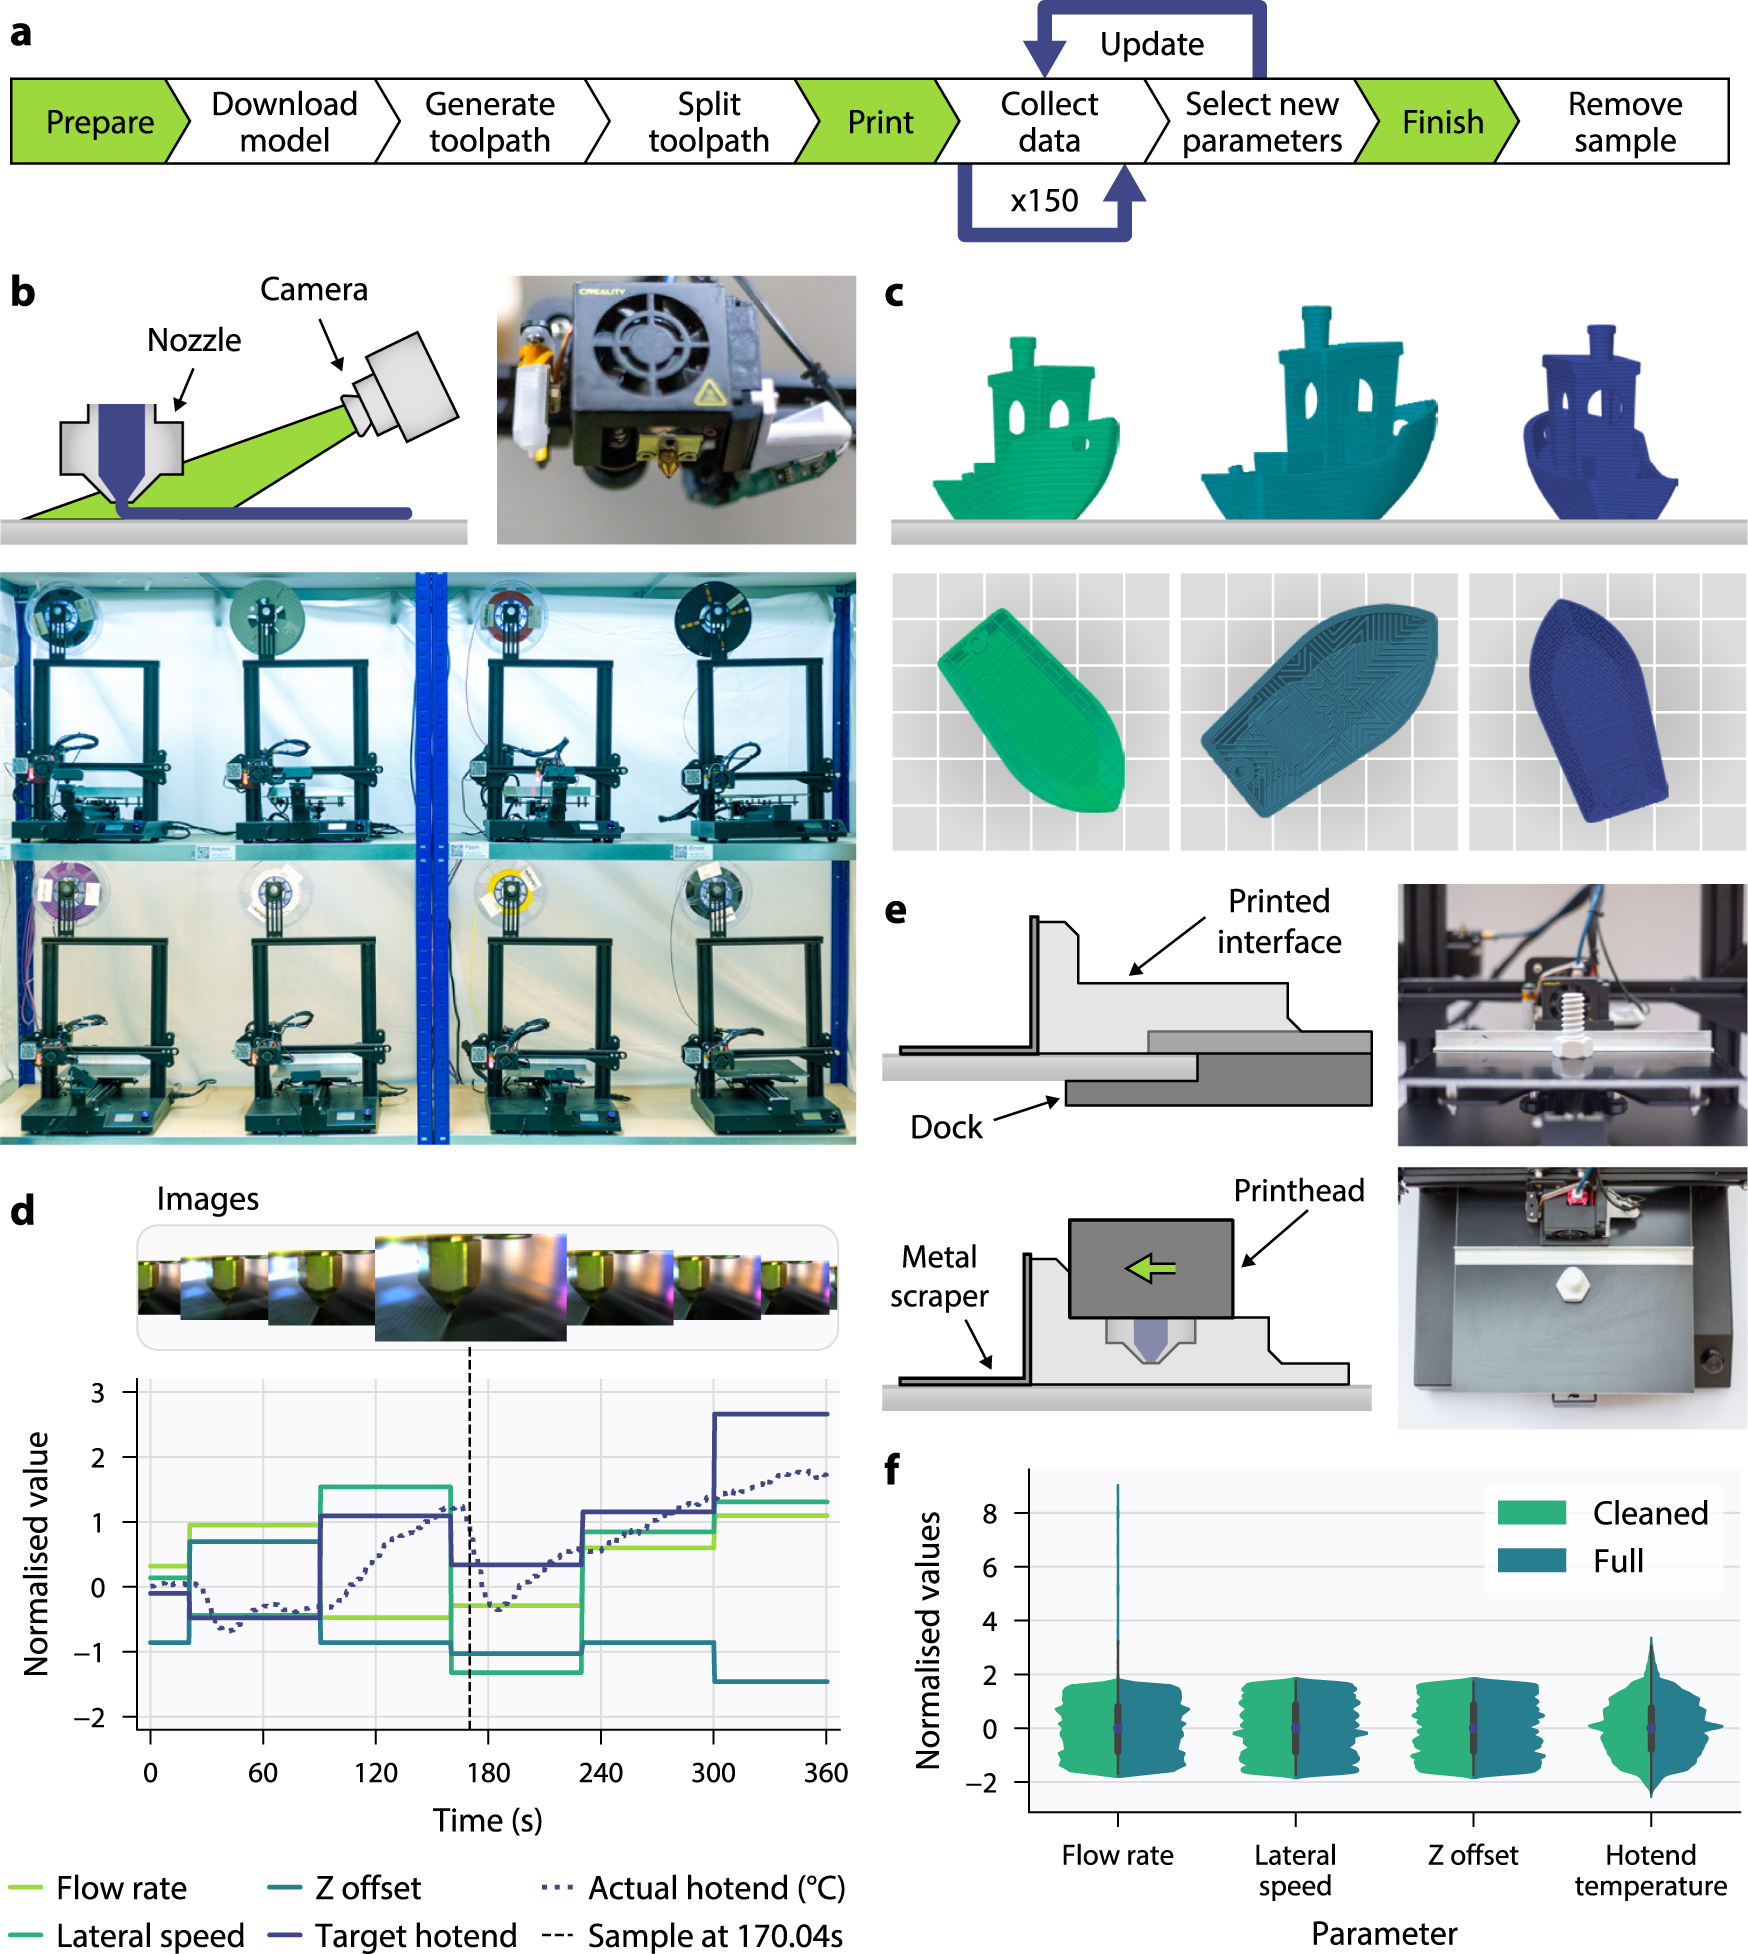 Generalisable 3D printing error detection and correction via neural networks | Nature